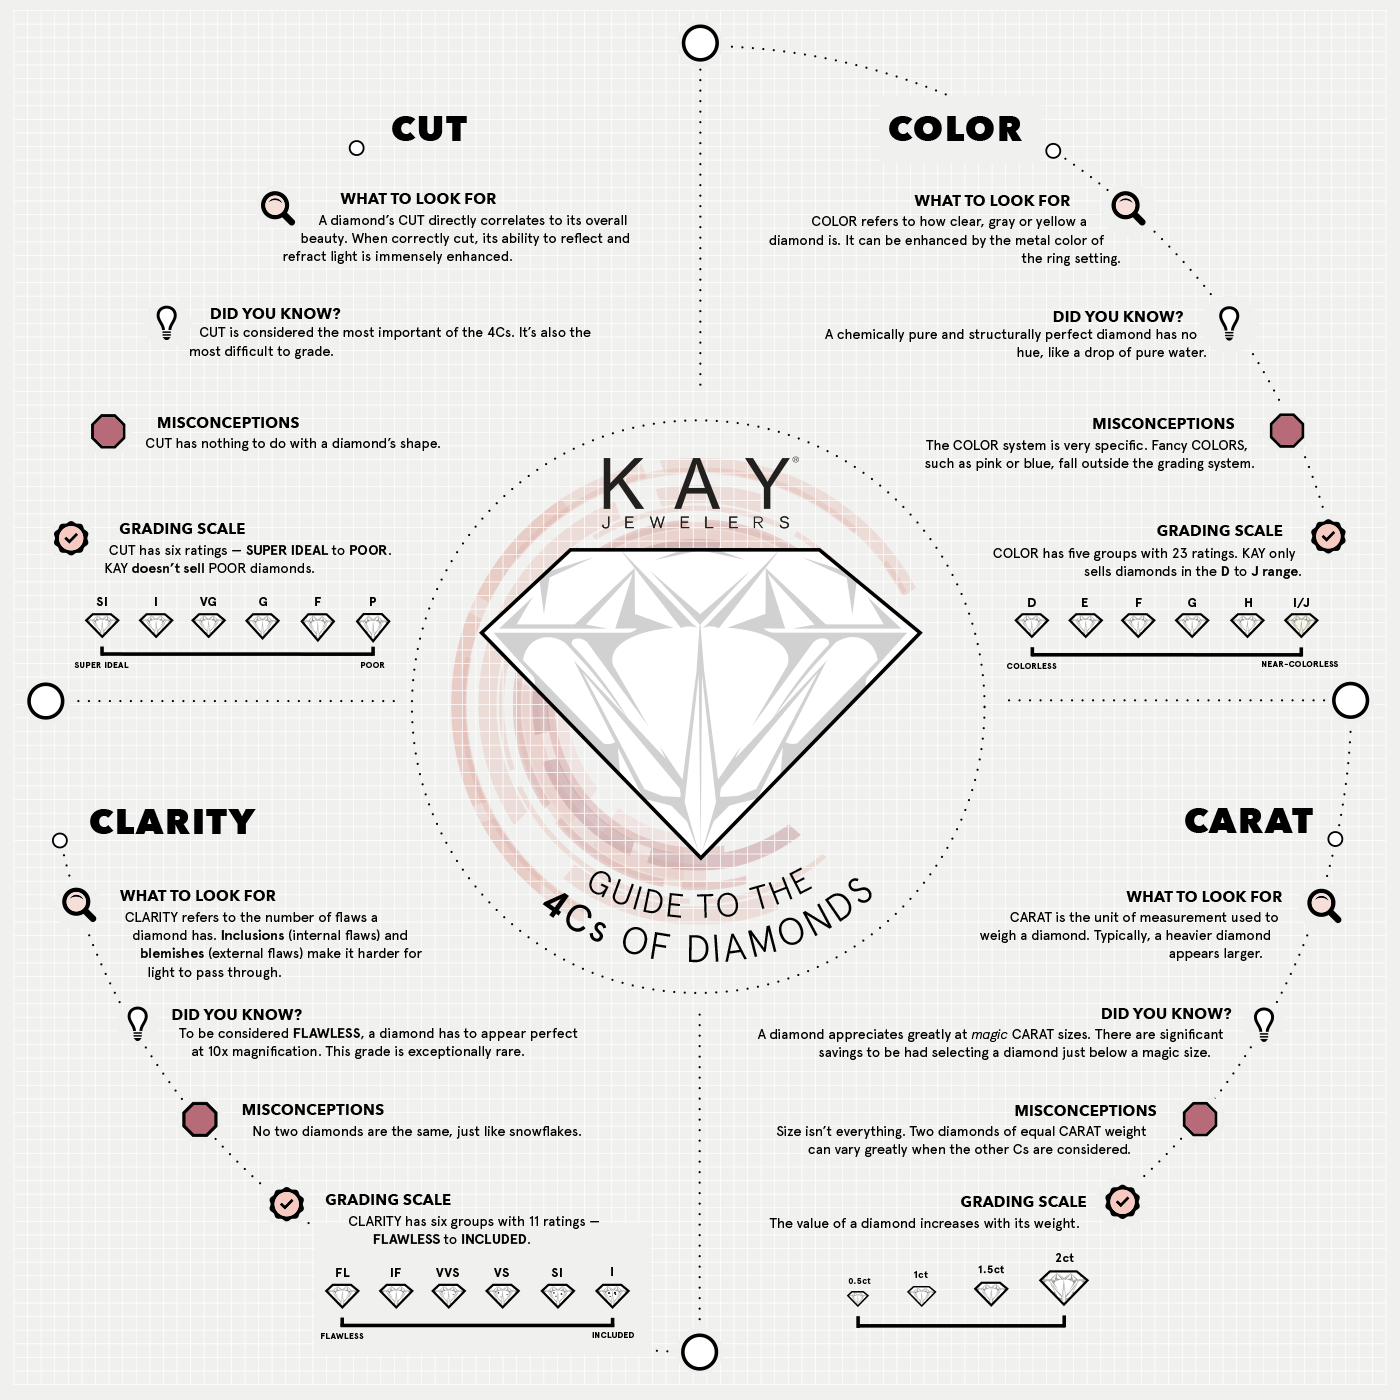 Learn more about the 4Cs of a diamond